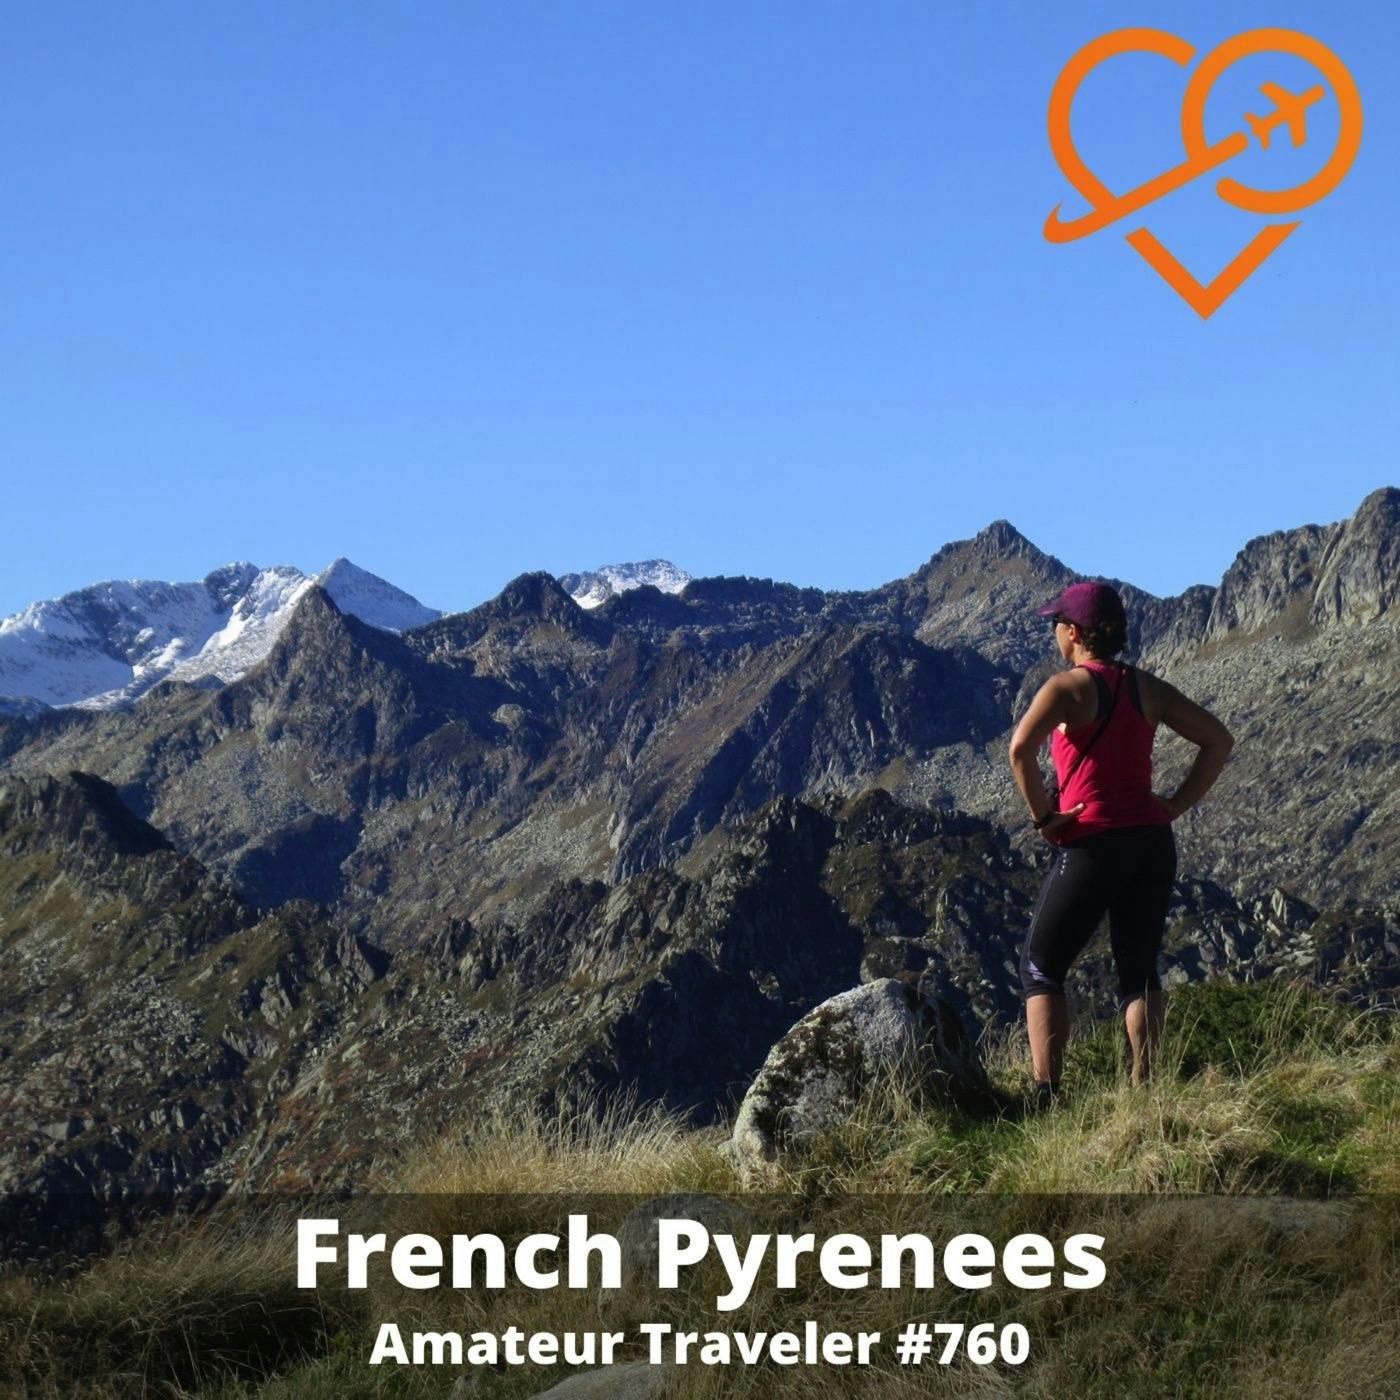 AT#760 - Travel to the French Pyrenees